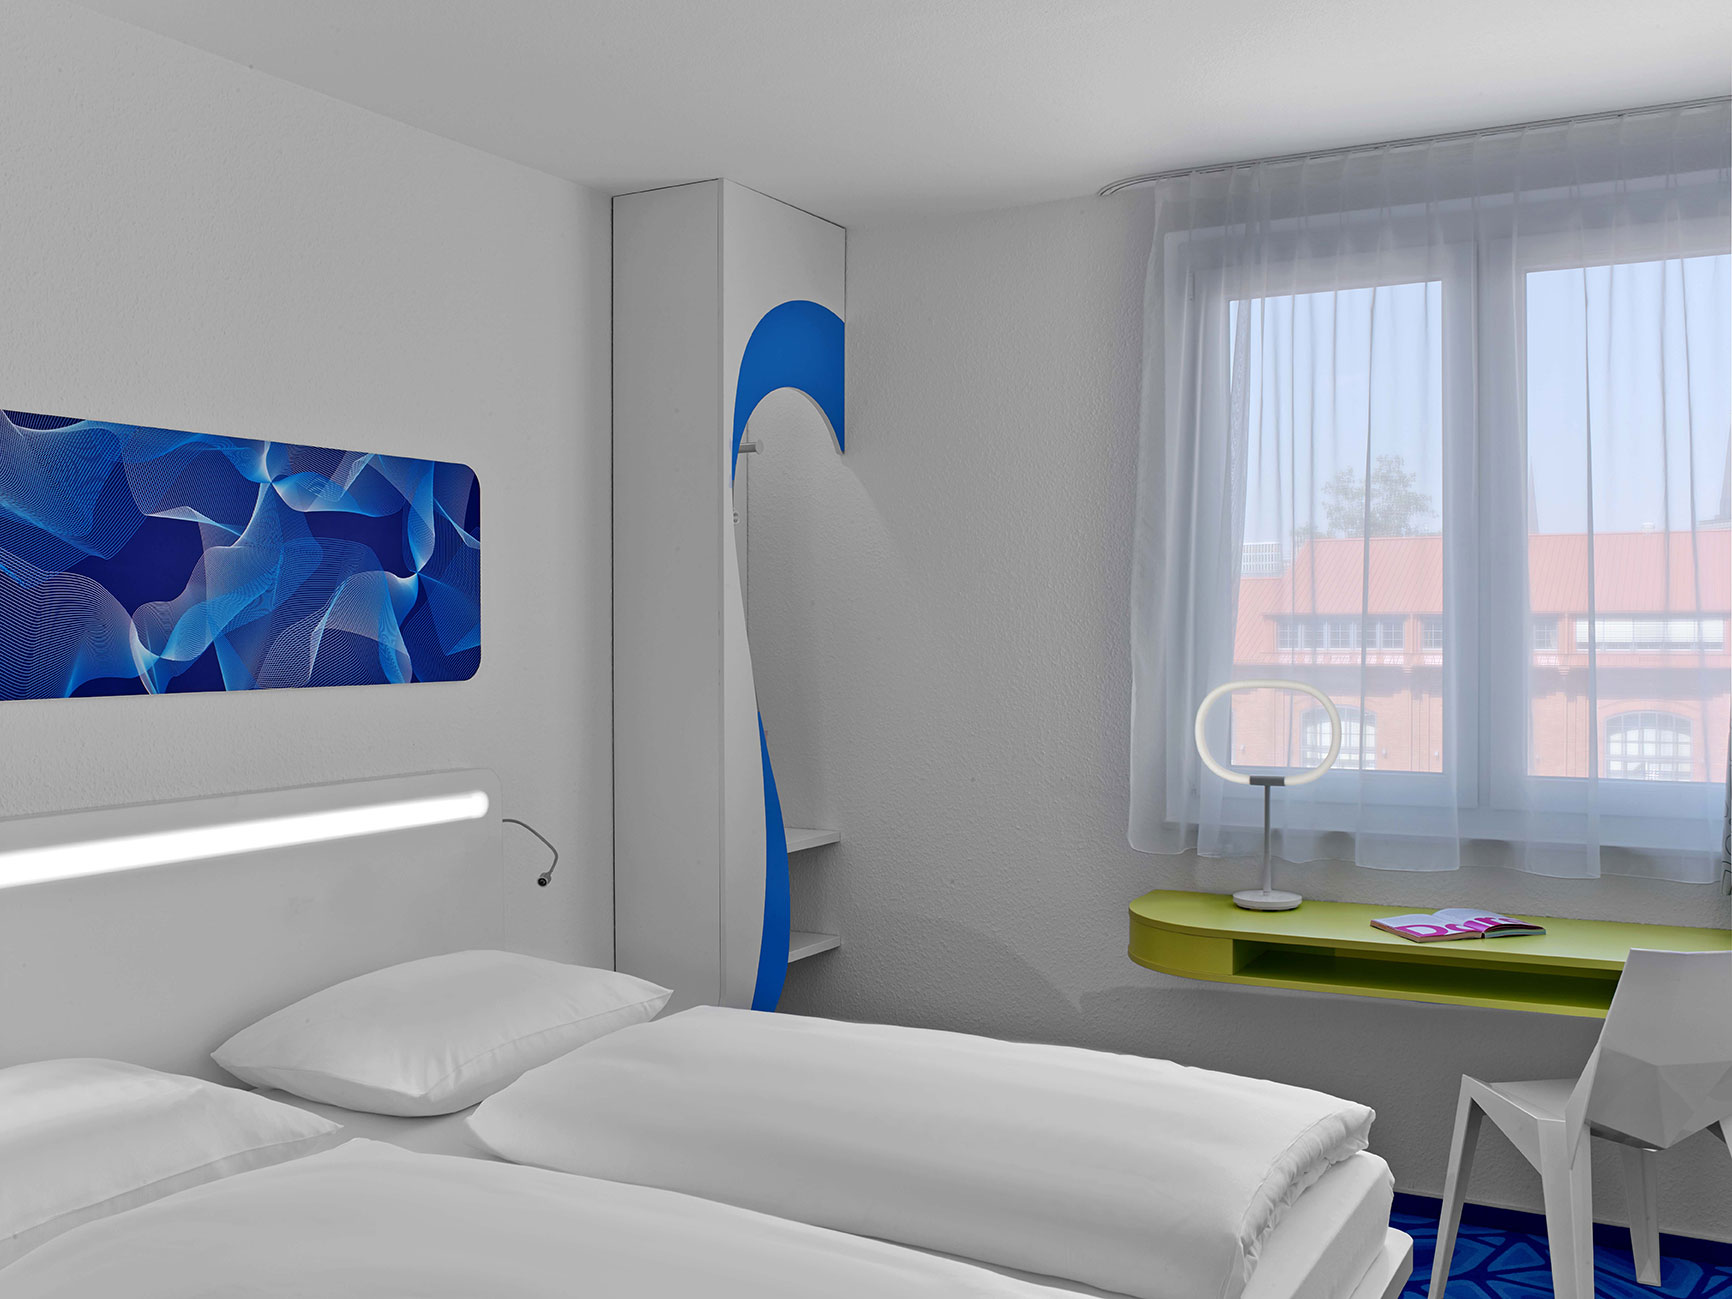 Design hotel room with blue patterns on the floor and wall, as well as a small desk